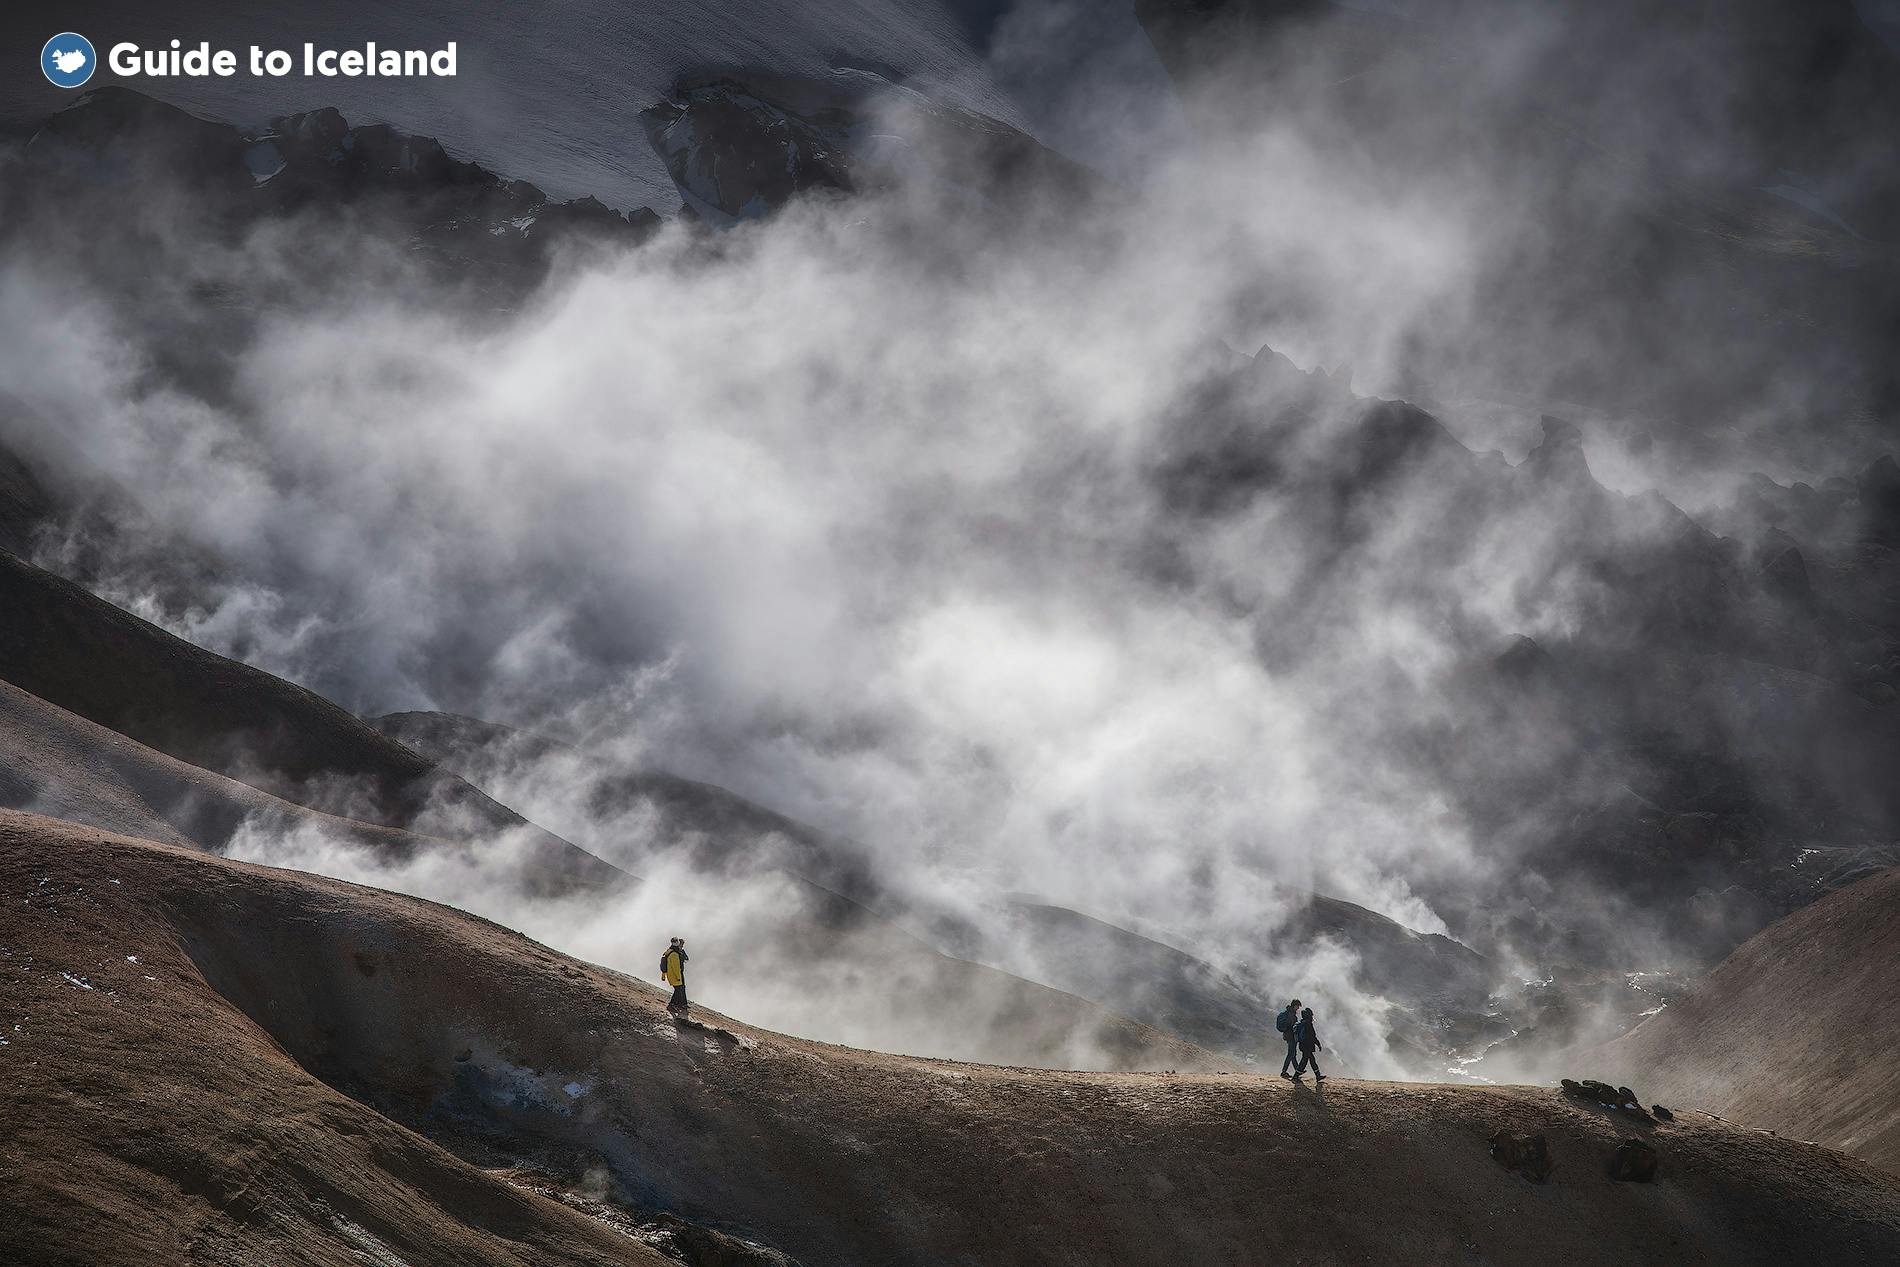 The central highlands have rhyolite mountains and hot spring areas, just like Landmannalaugar.